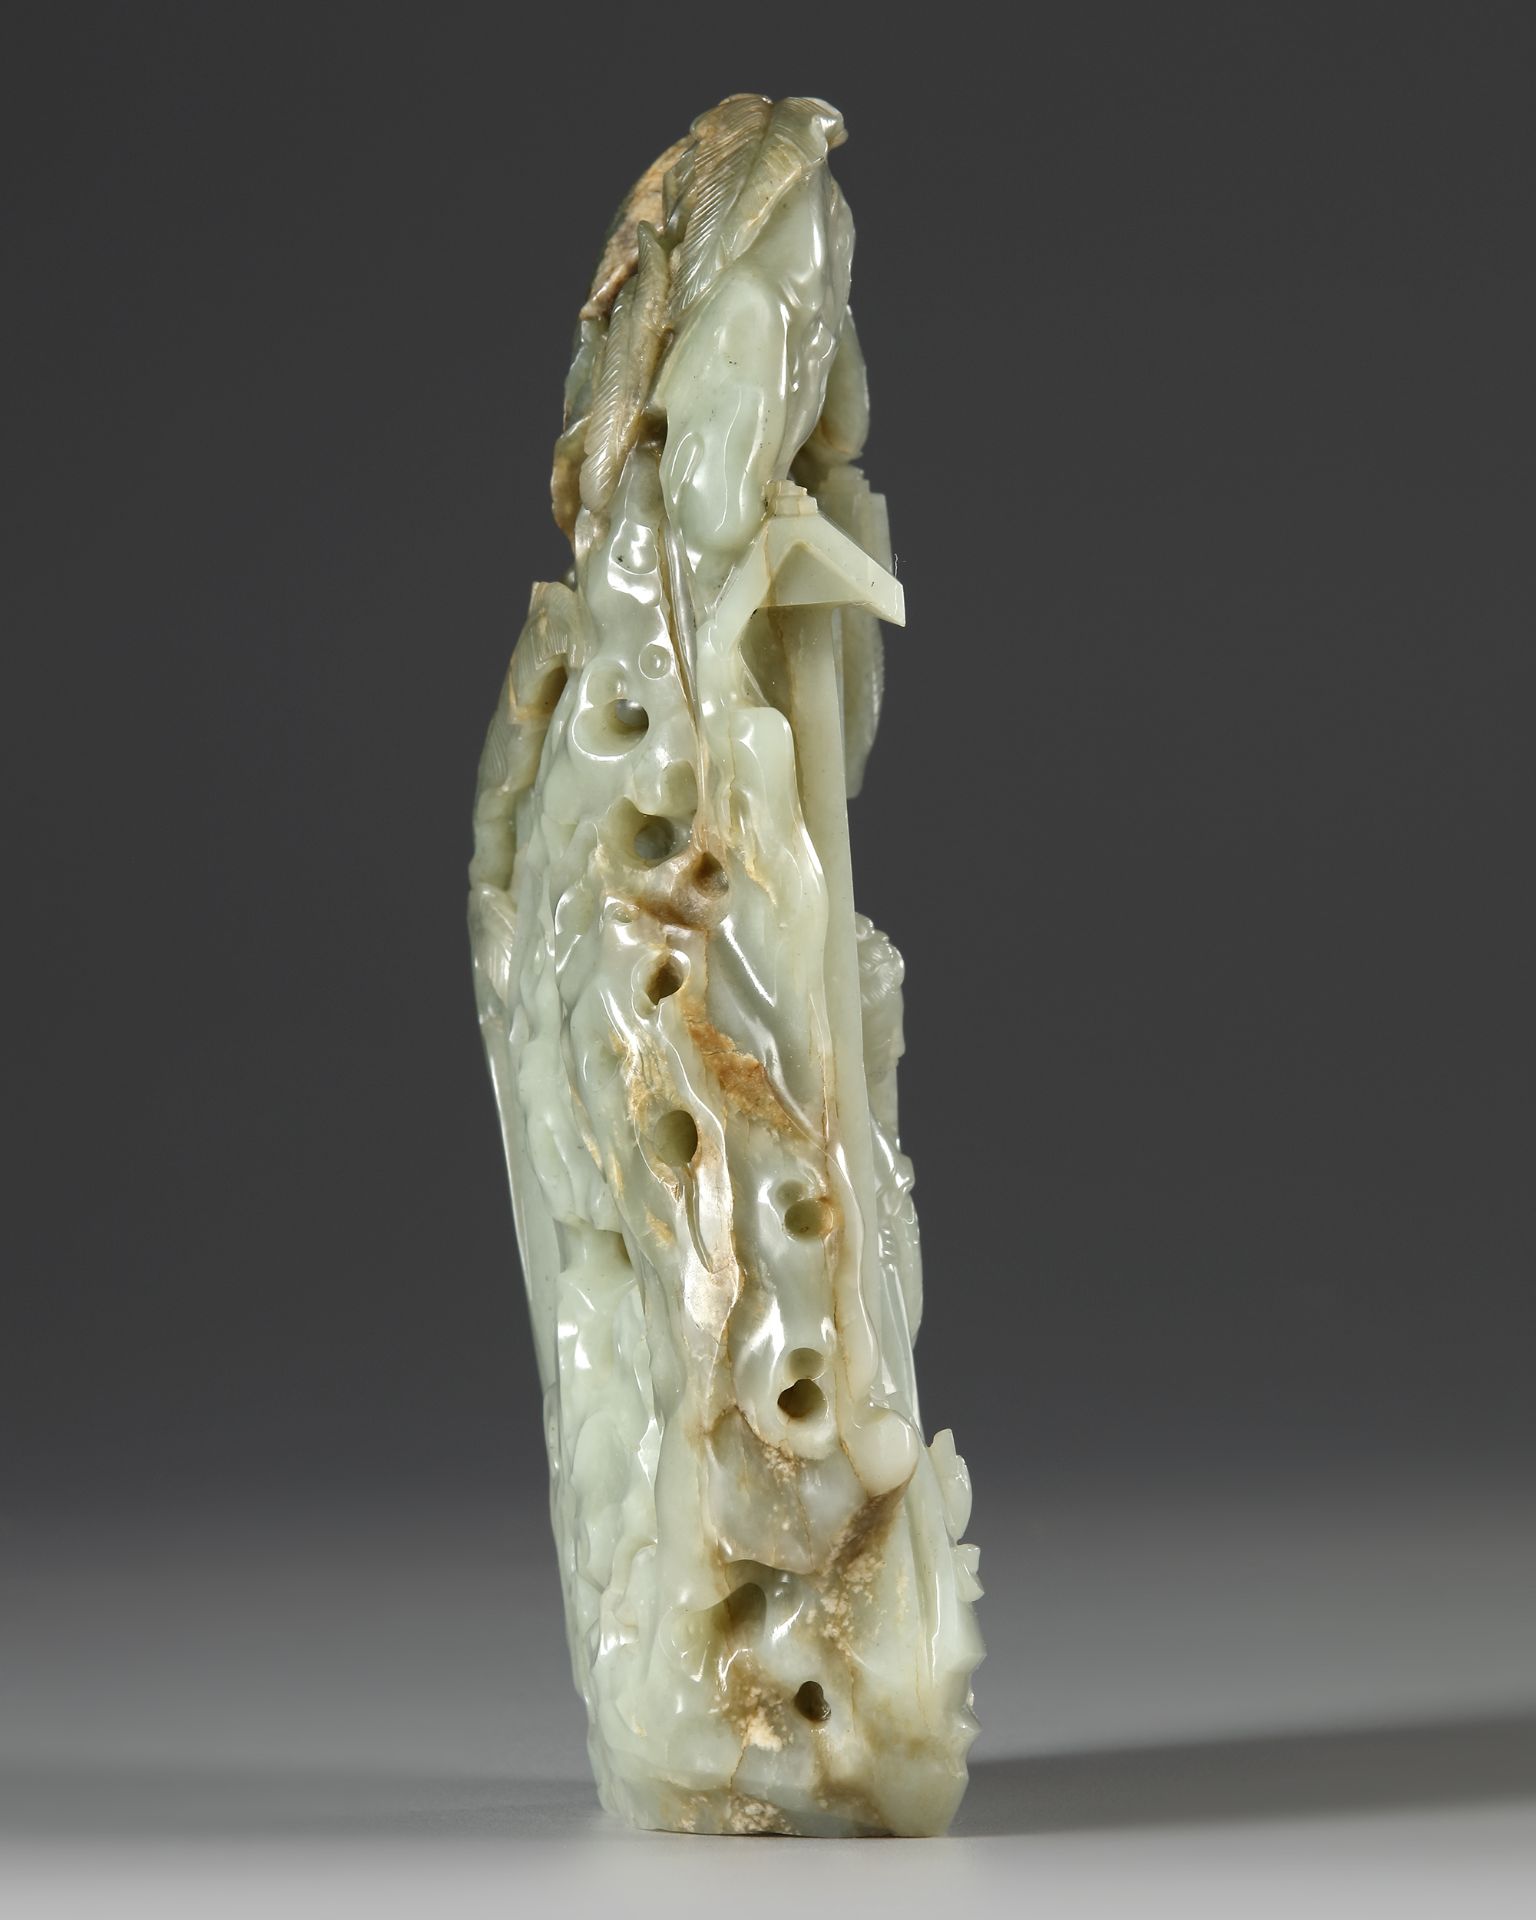 A CELADON JADE CARVING OF A MOUNTAIN,QING DYNASTY (1644-1911) - Image 4 of 5